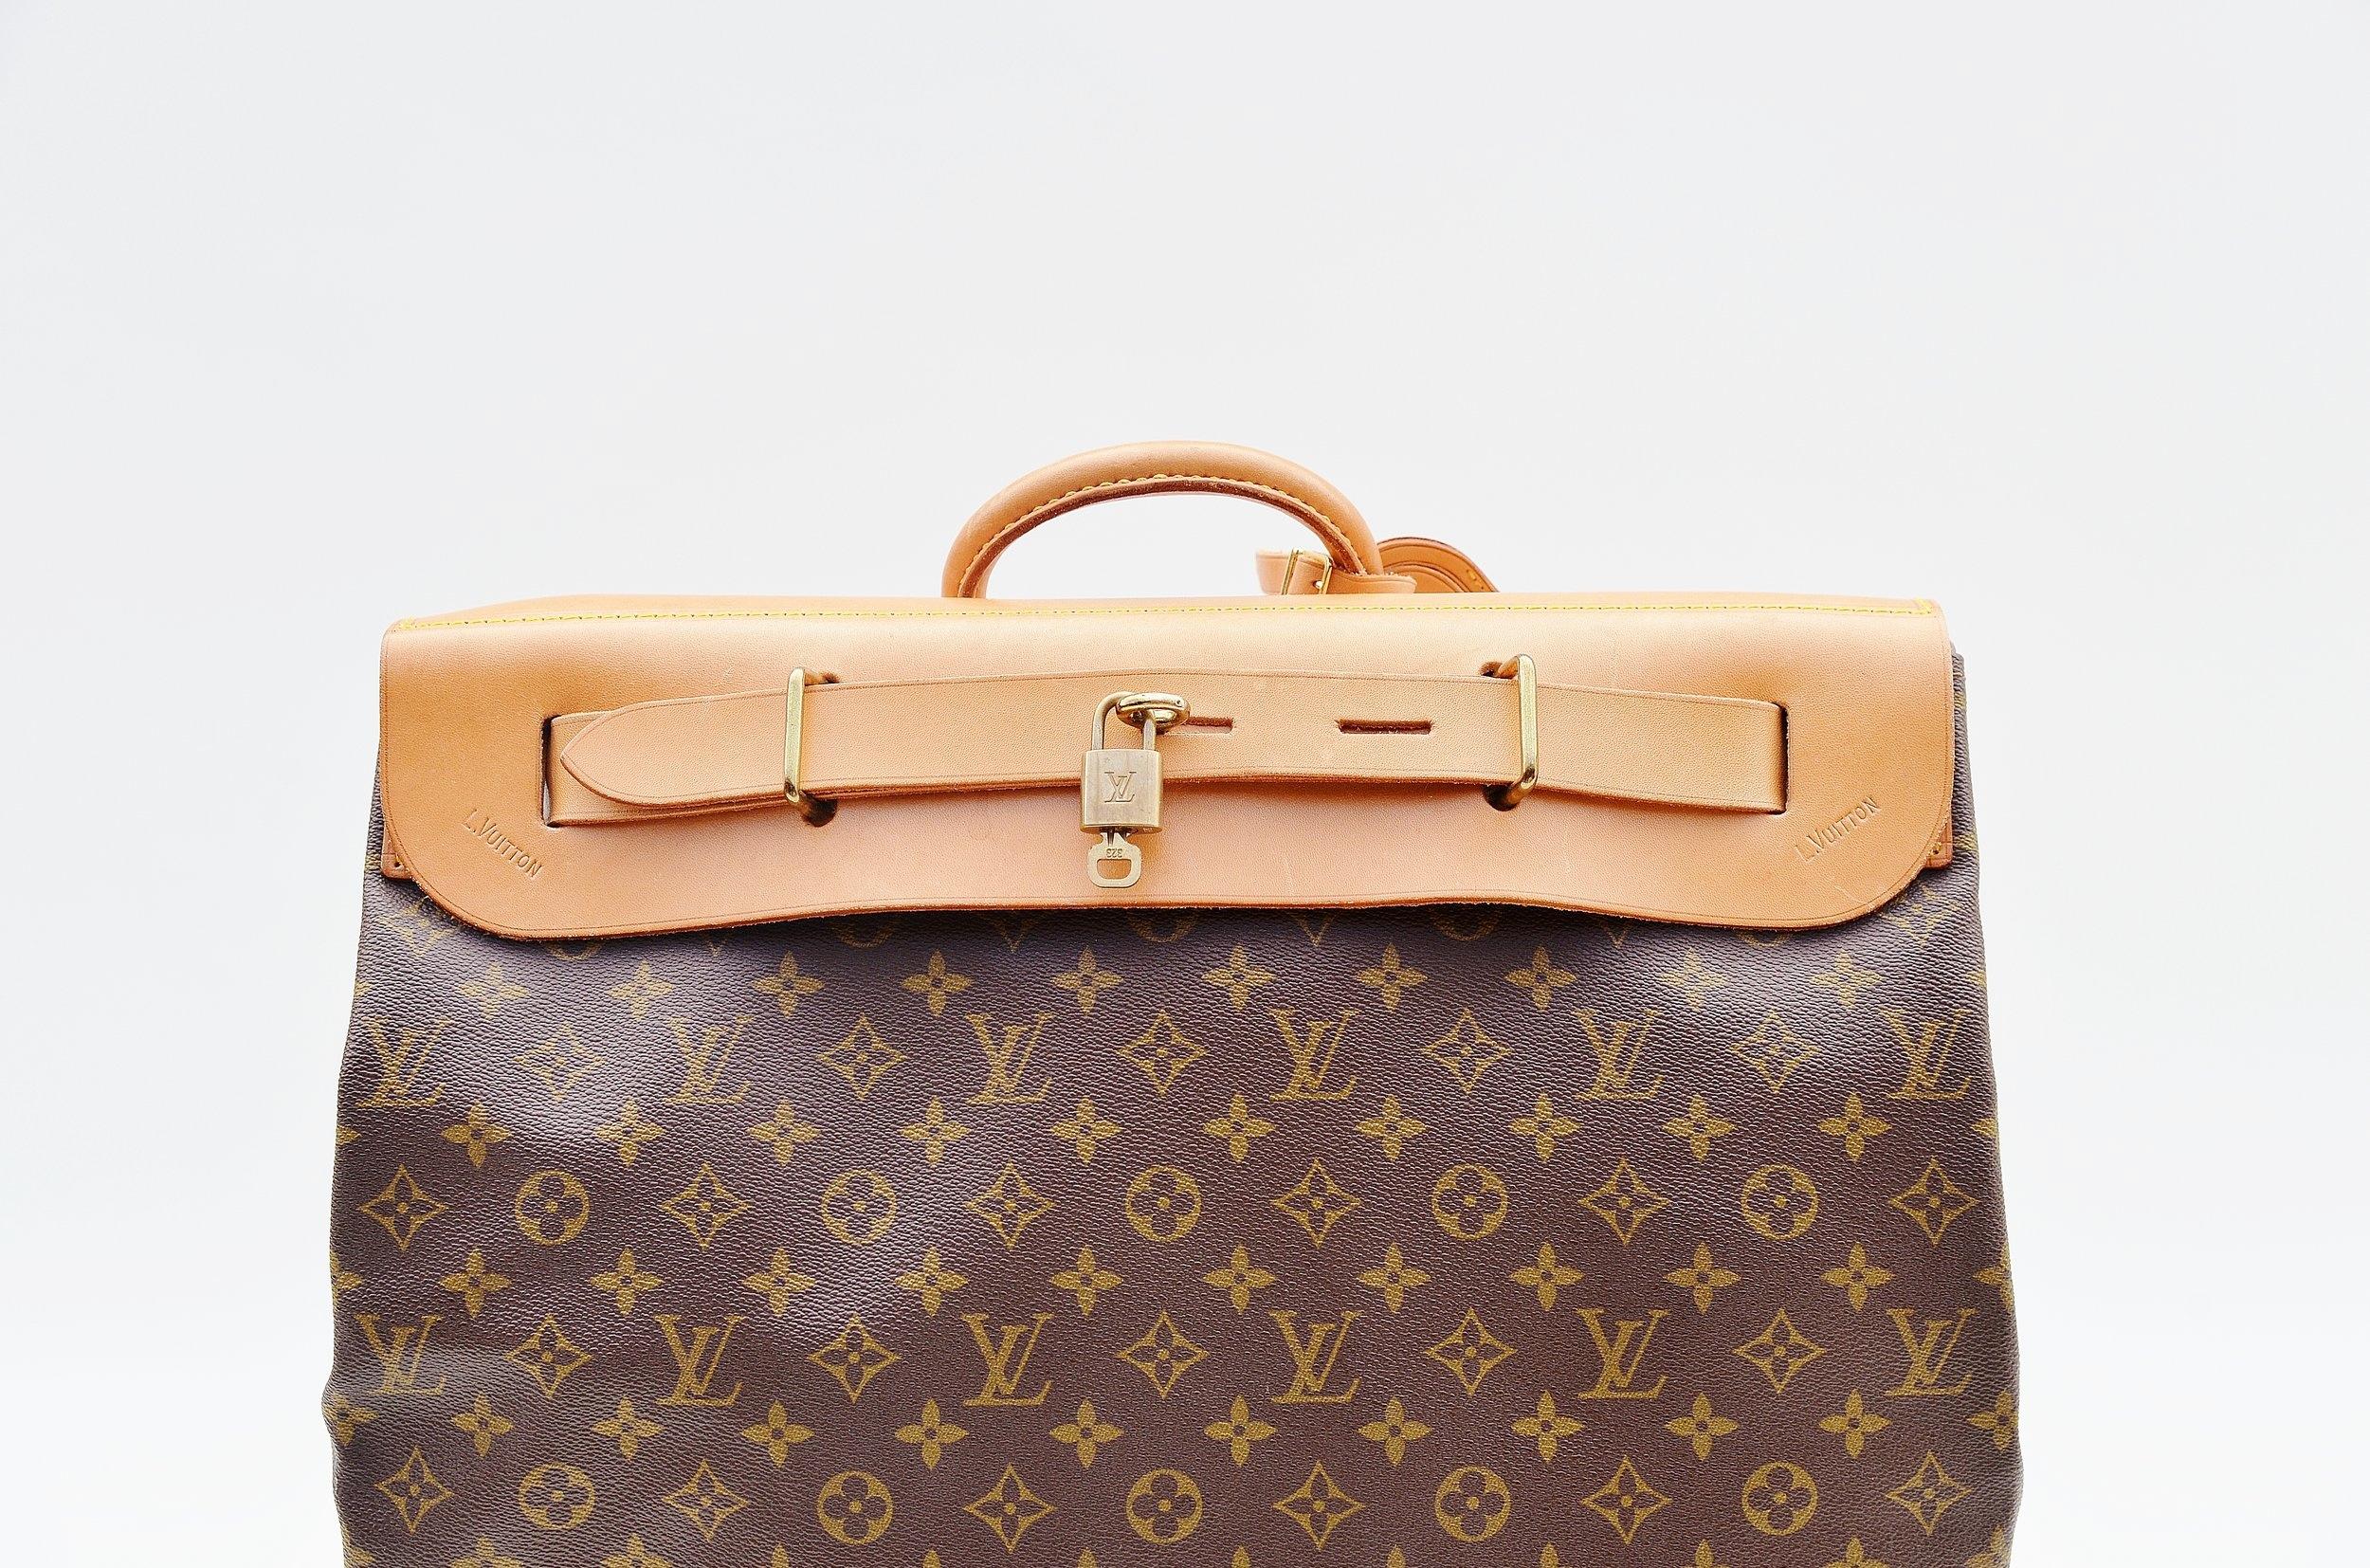 From the collection of Savineti we offer this Louis Vuitton Steamer Bag:
-	Brand: Louis Vuitton
-	Model: Steamer Bag
-	Condition: Good
-	Materials: canvas, leather, gold-tone hardware
-       Length of the handle: 4cm
-       Extras: Lock plus